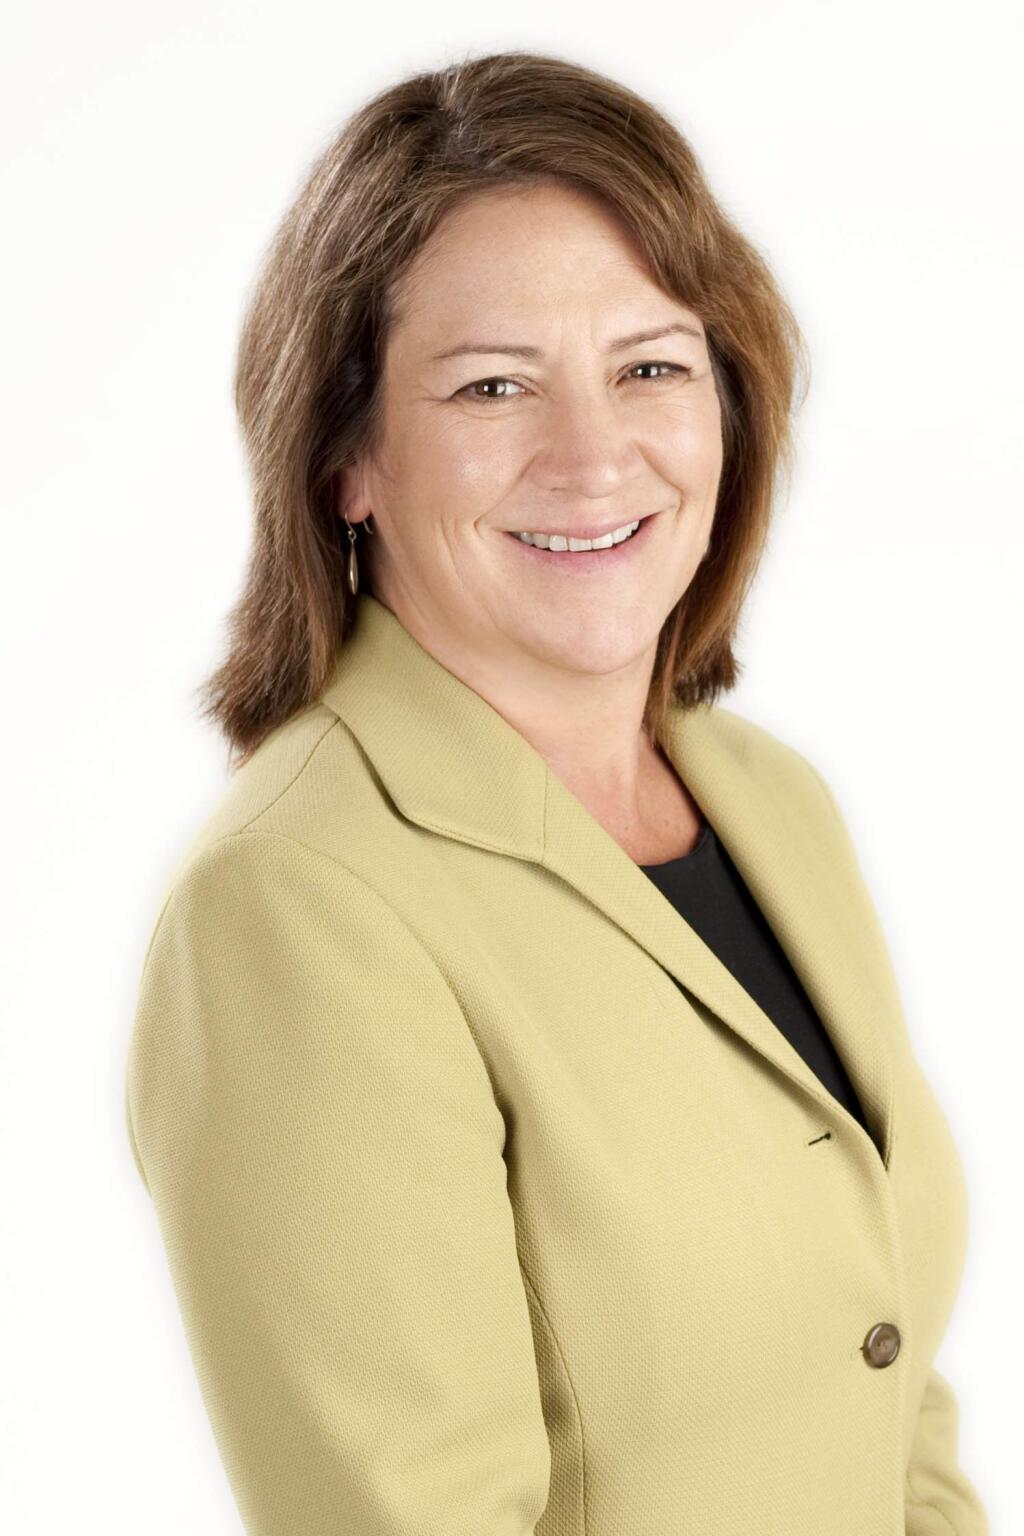 Cynthia Negri is executive vice president and chief operating officer of Redwood Credit Union in Santa Rosa.